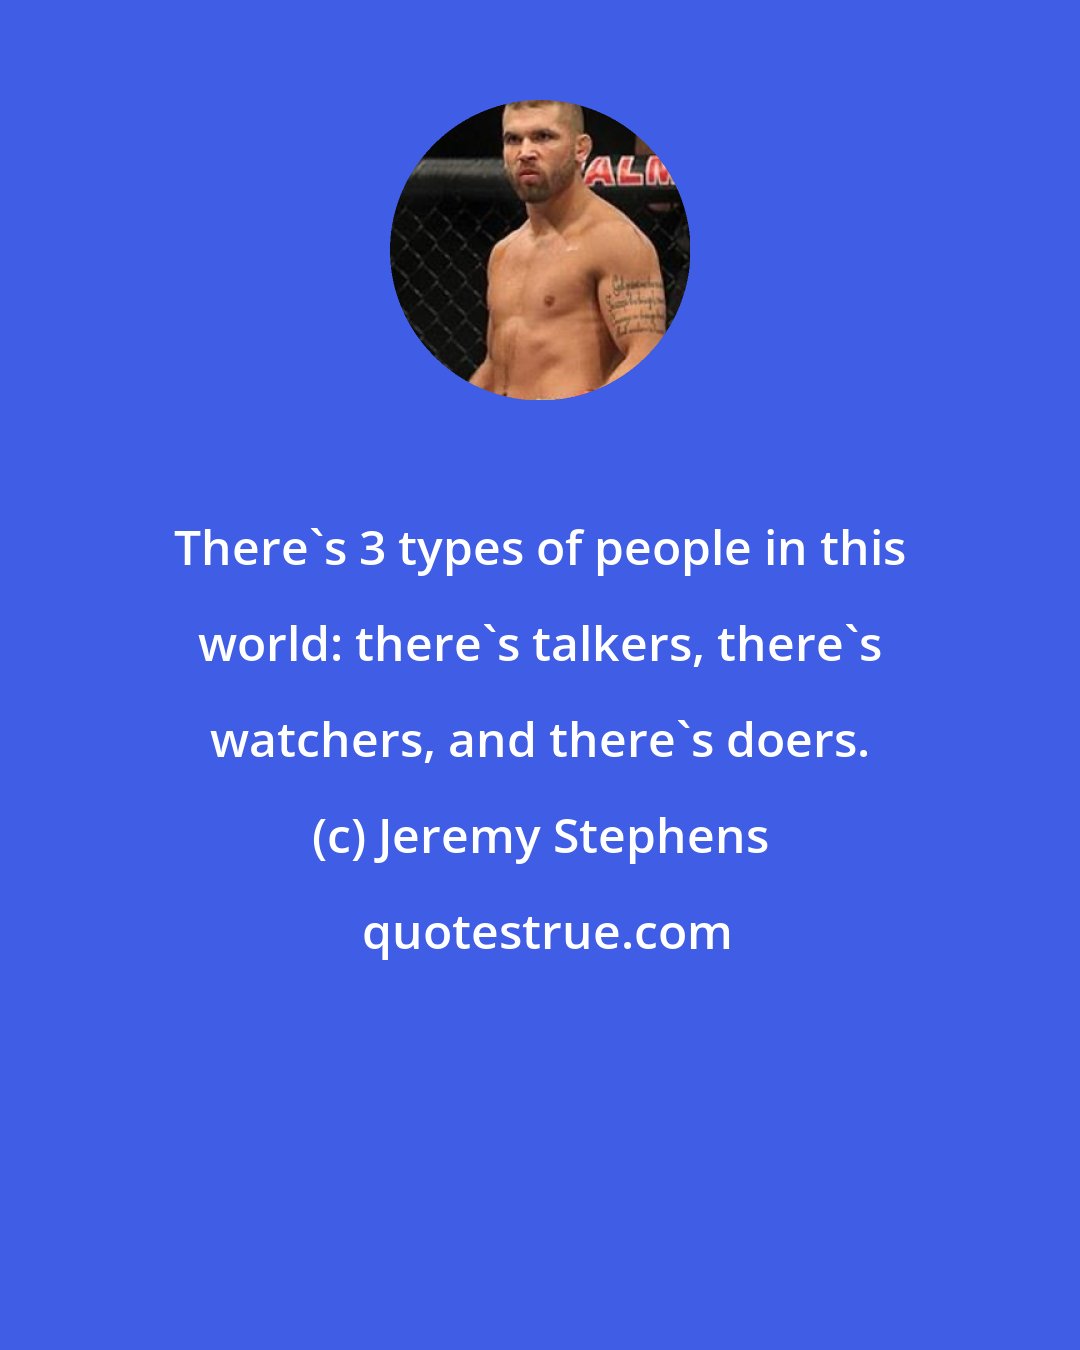 Jeremy Stephens: There's 3 types of people in this world: there's talkers, there's watchers, and there's doers.